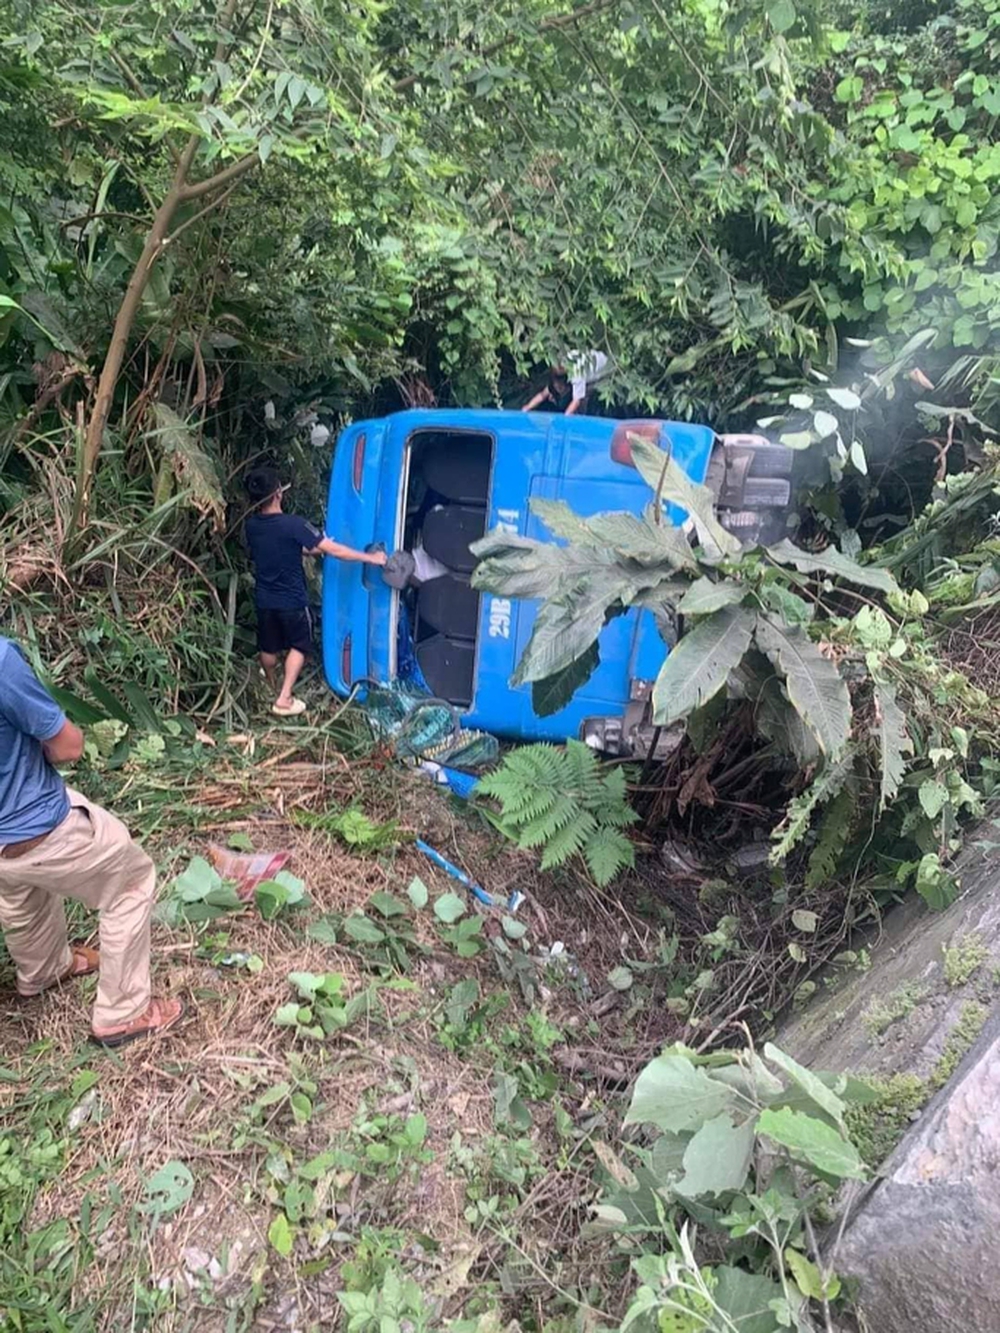 A passenger car carrying 30 people suddenly plunged into the sound bar in Tam Dao - Photo 1.